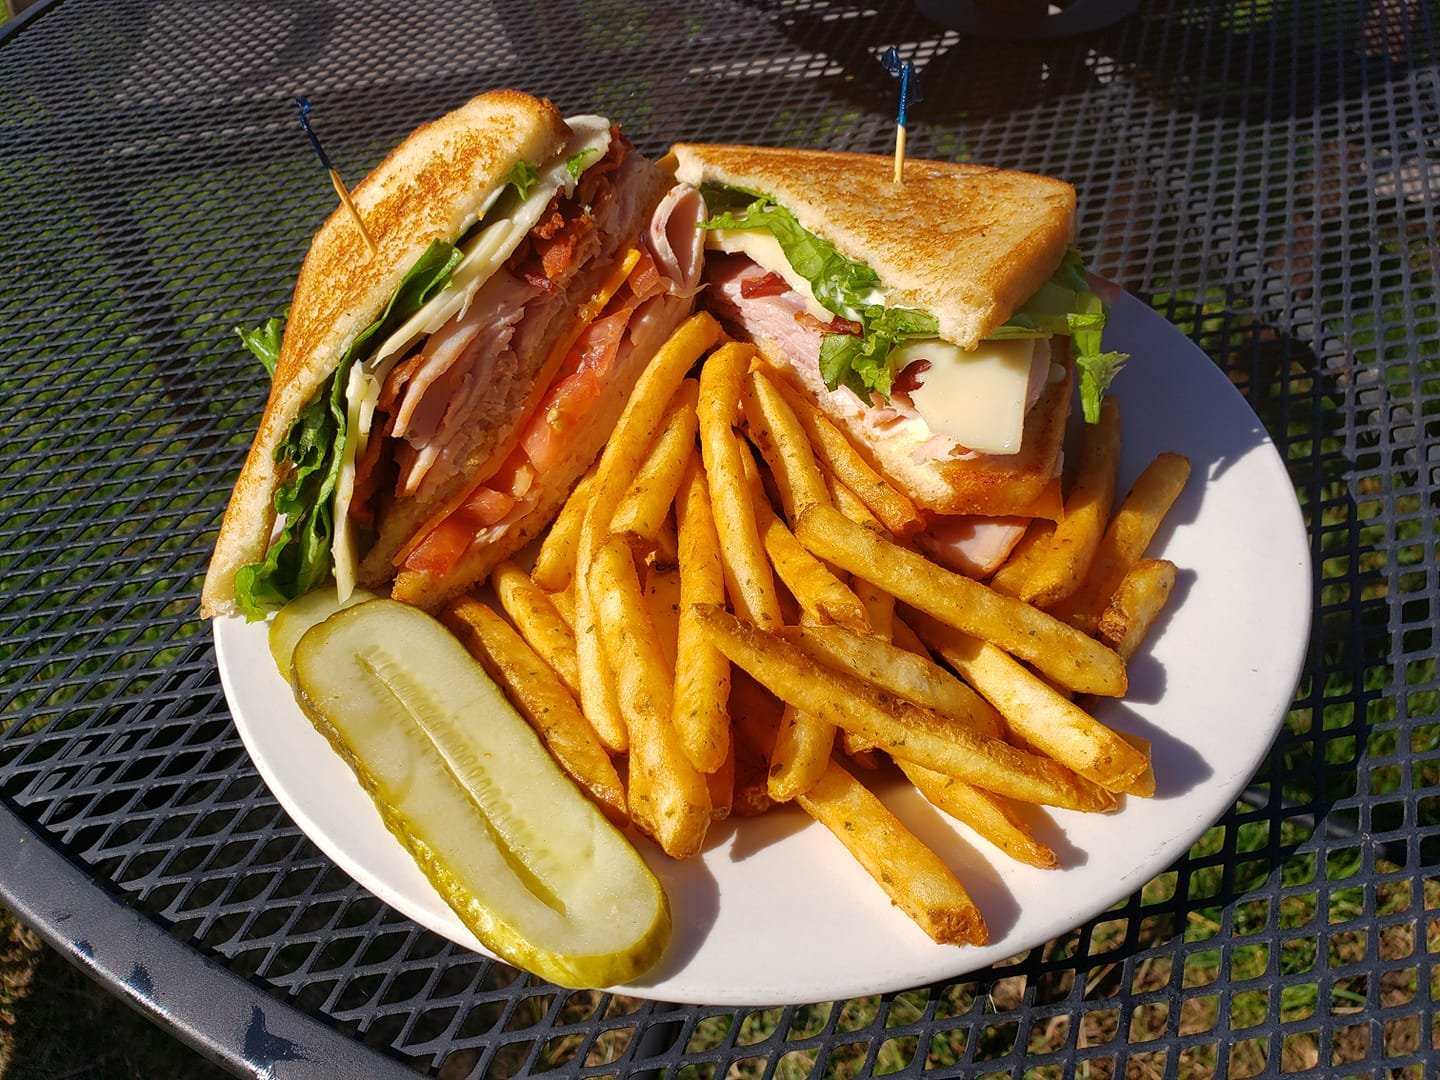 Turkey and Ham Club with Chive Fries